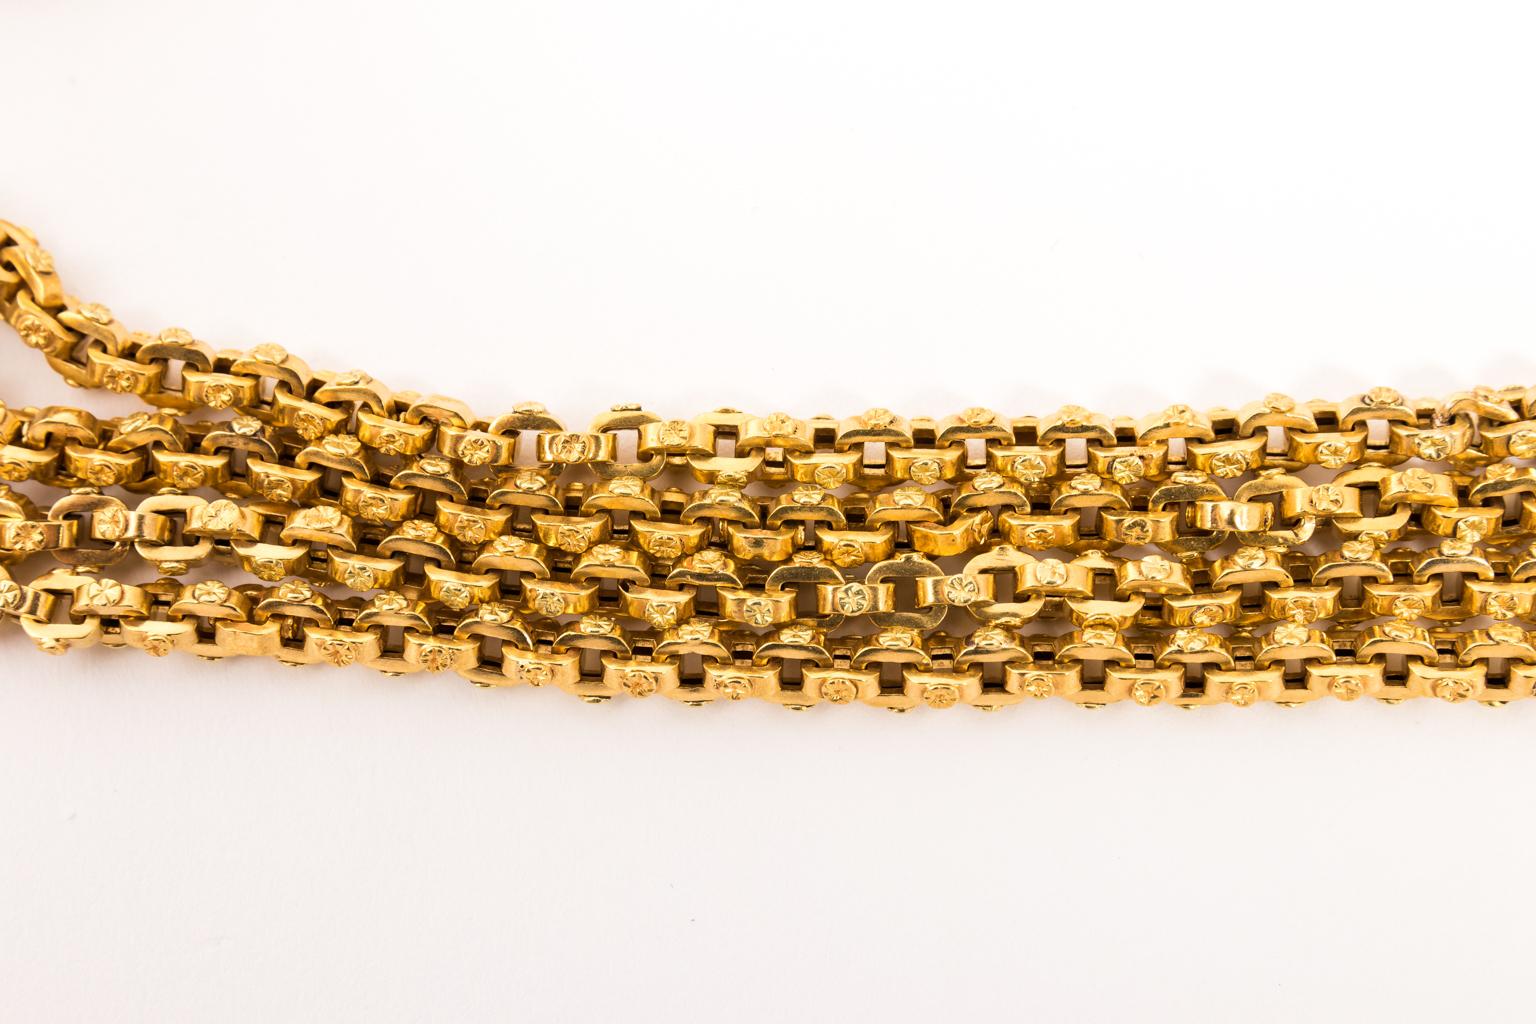 This is an amazing chain and very hard to find one in such great condition and of this age. I have consulted a reputable estate jeweler and had confirmed this necklace was from 18th century. The chain is continuous without clasp. 72 inches long. 4.8